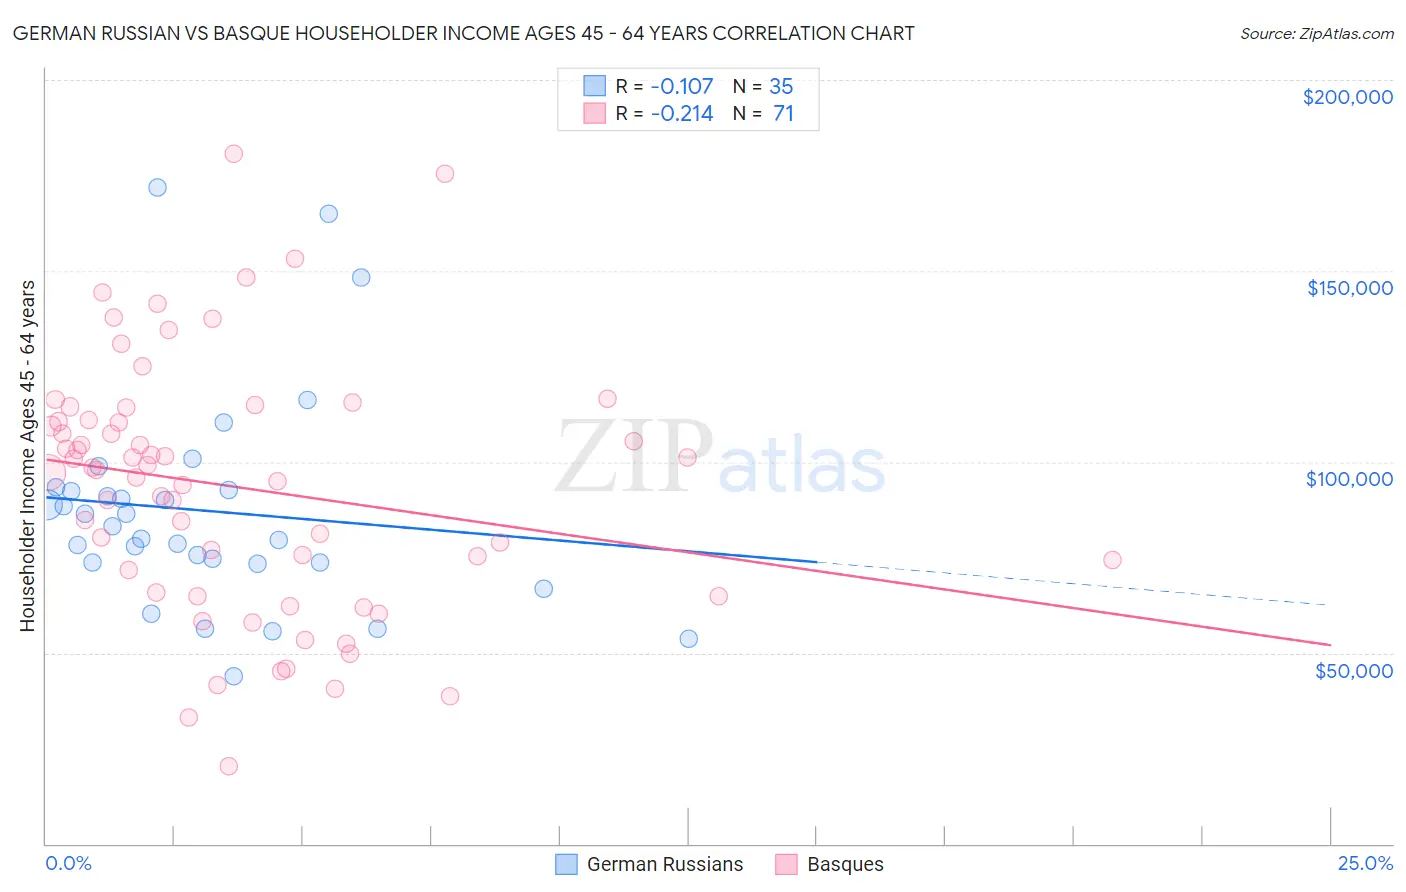 German Russian vs Basque Householder Income Ages 45 - 64 years